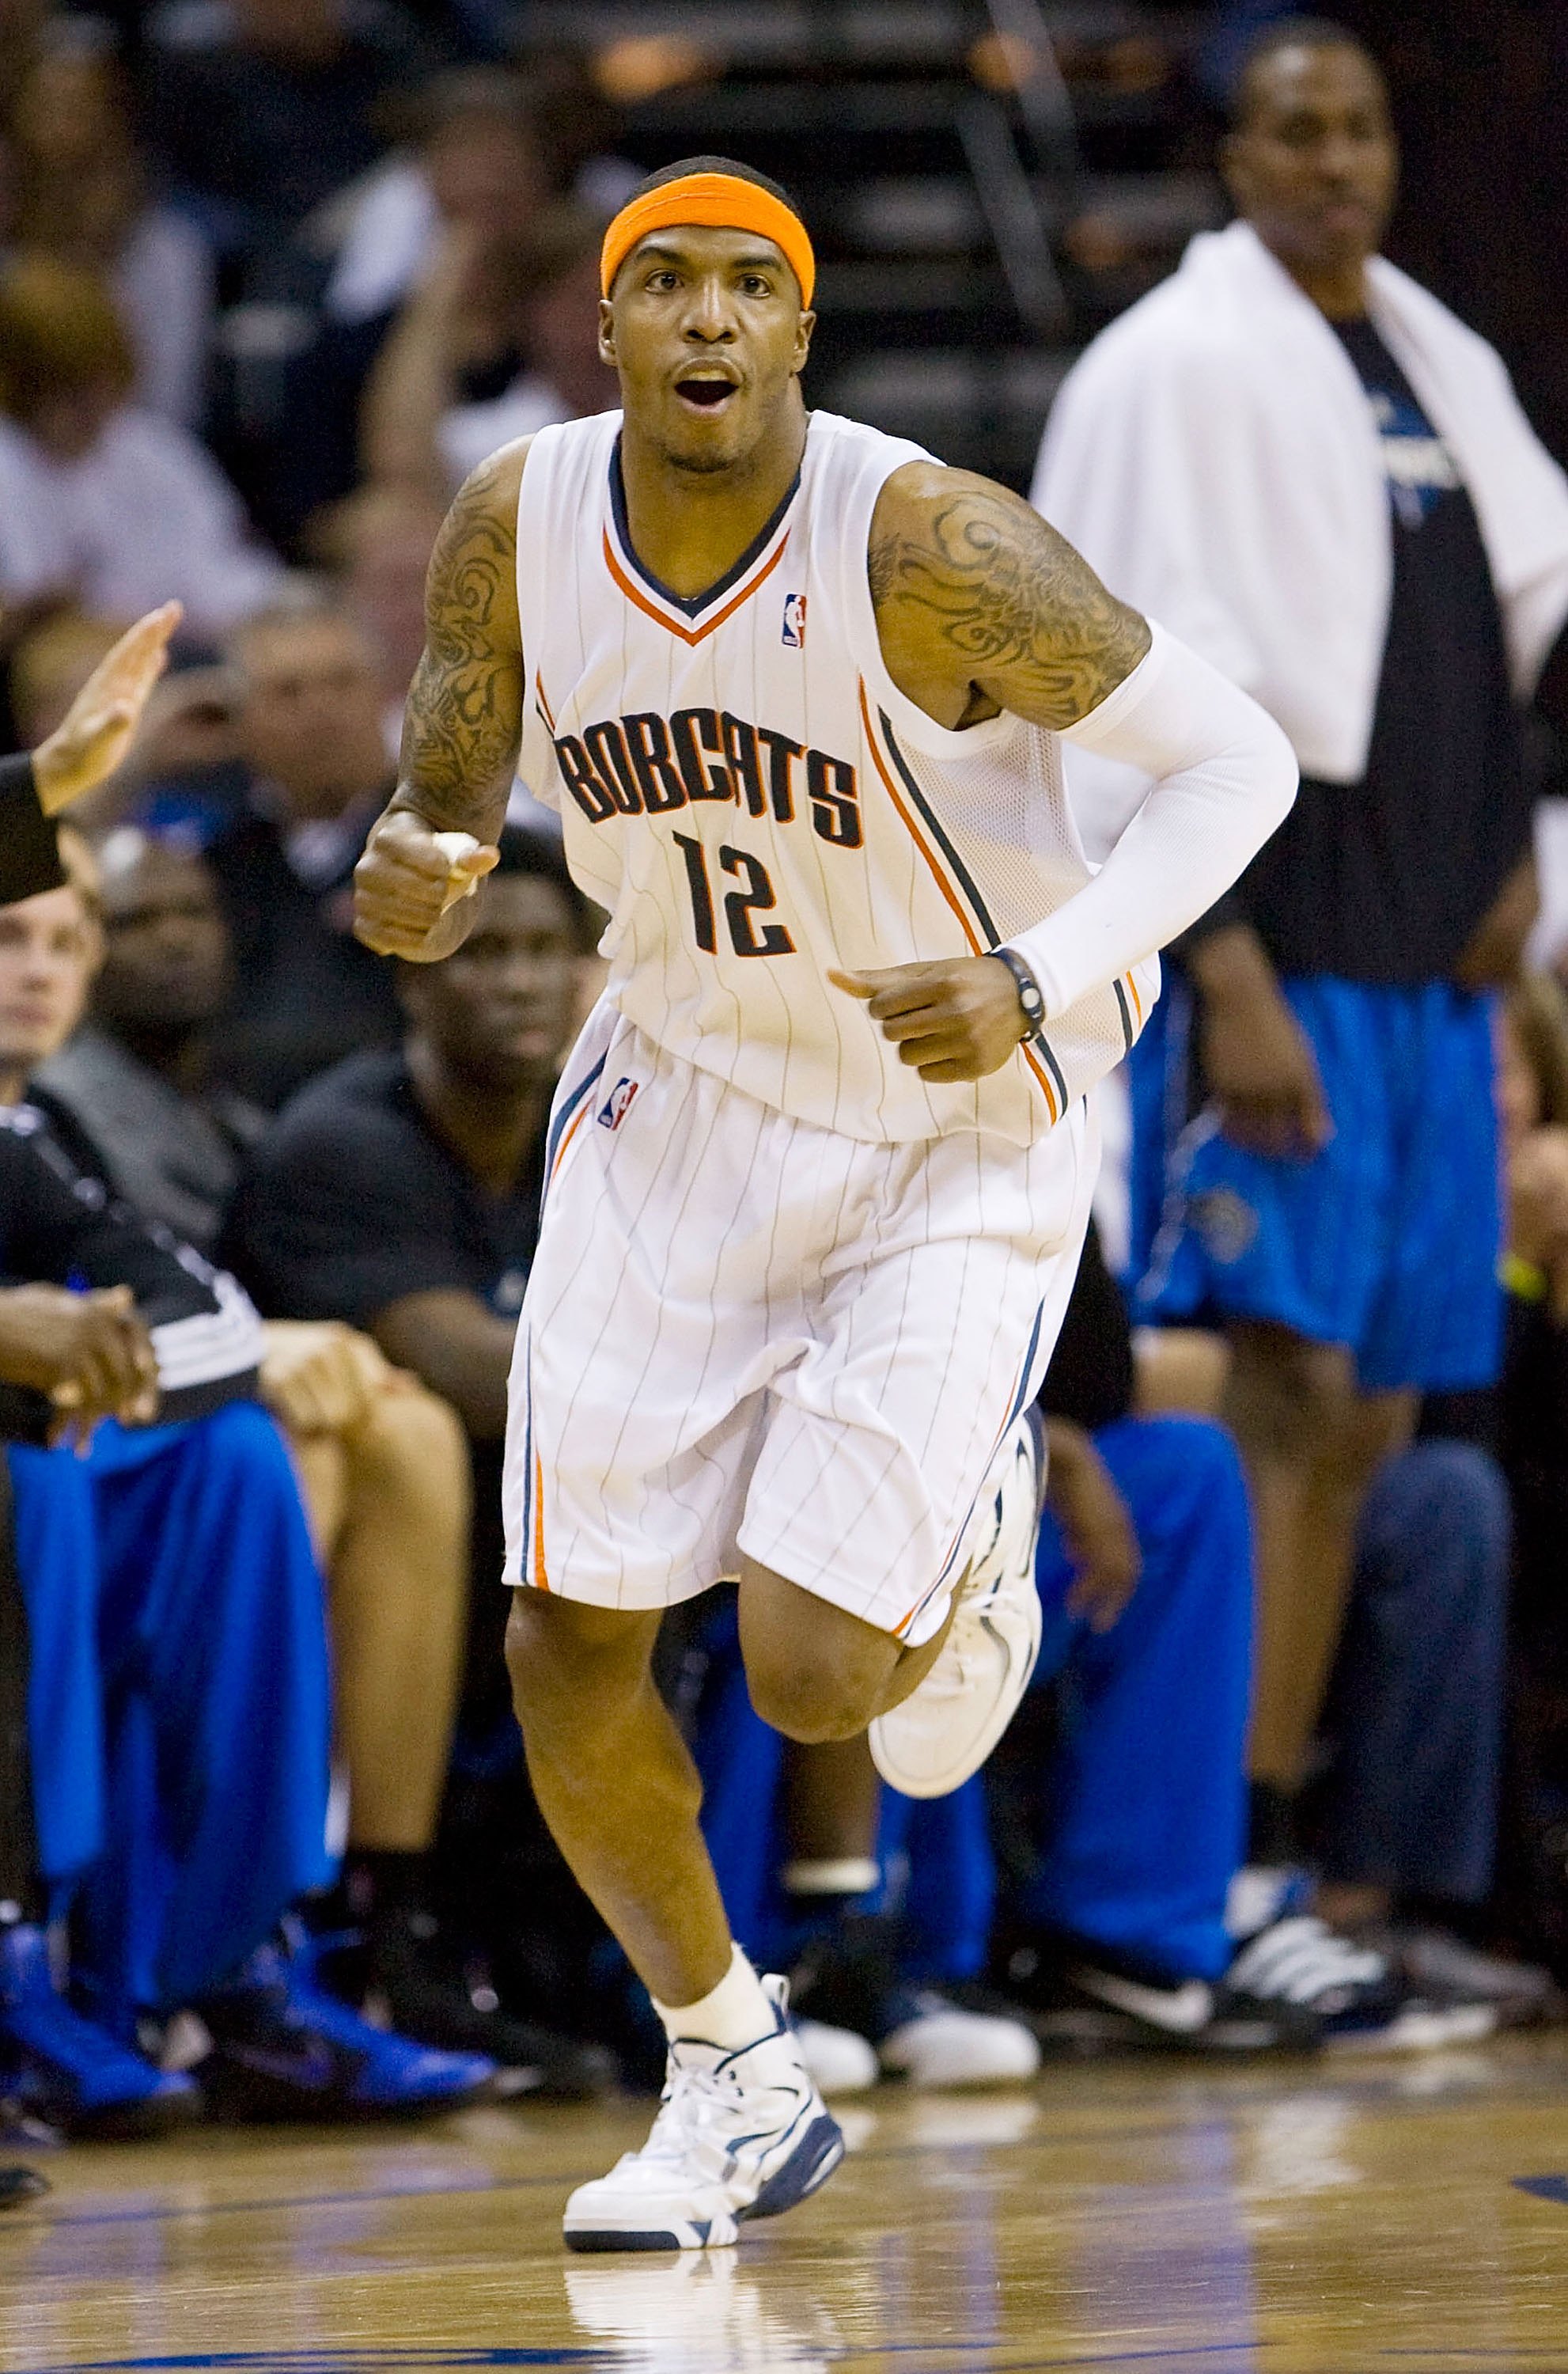 CHARLOTTE, NC - APRIL 26: Tyrus Thomas #12 of the Charlotte Bobcats reacts after making a basket against the Orlando Magic at Time Warner Cable Arena on April 26, 2010 in Charlotte, North Carolina.  The Magic defeated the Bobcats 99-90 to complete the fou